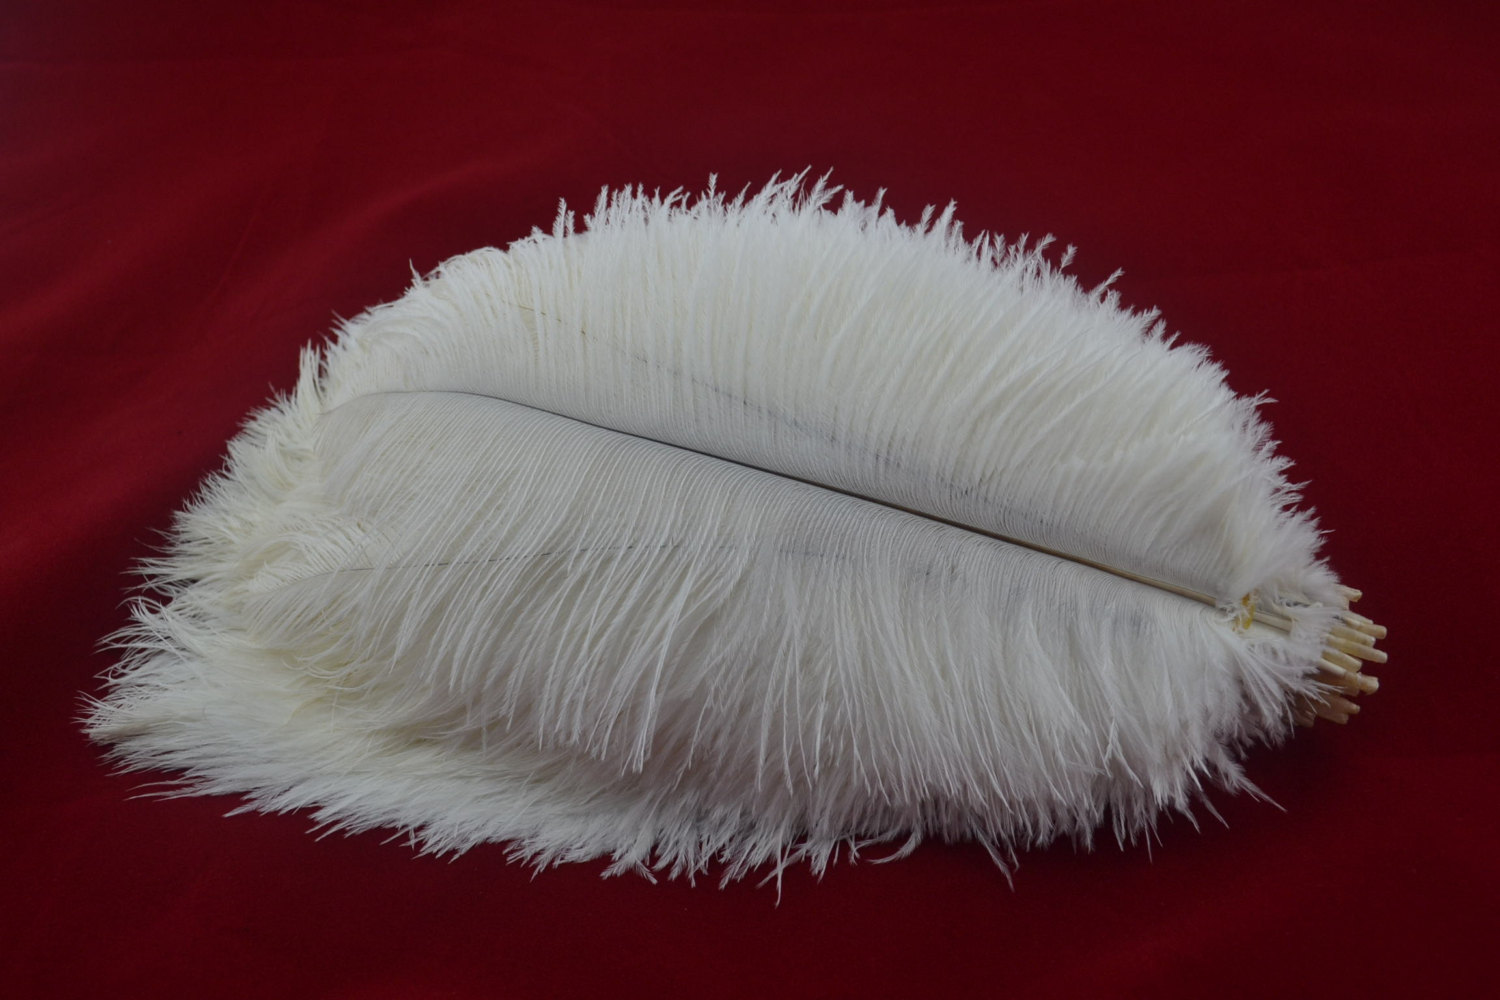 150pcs 16-18inch ostrich feathers AND 150pcs 18-20inch ostrich feathers